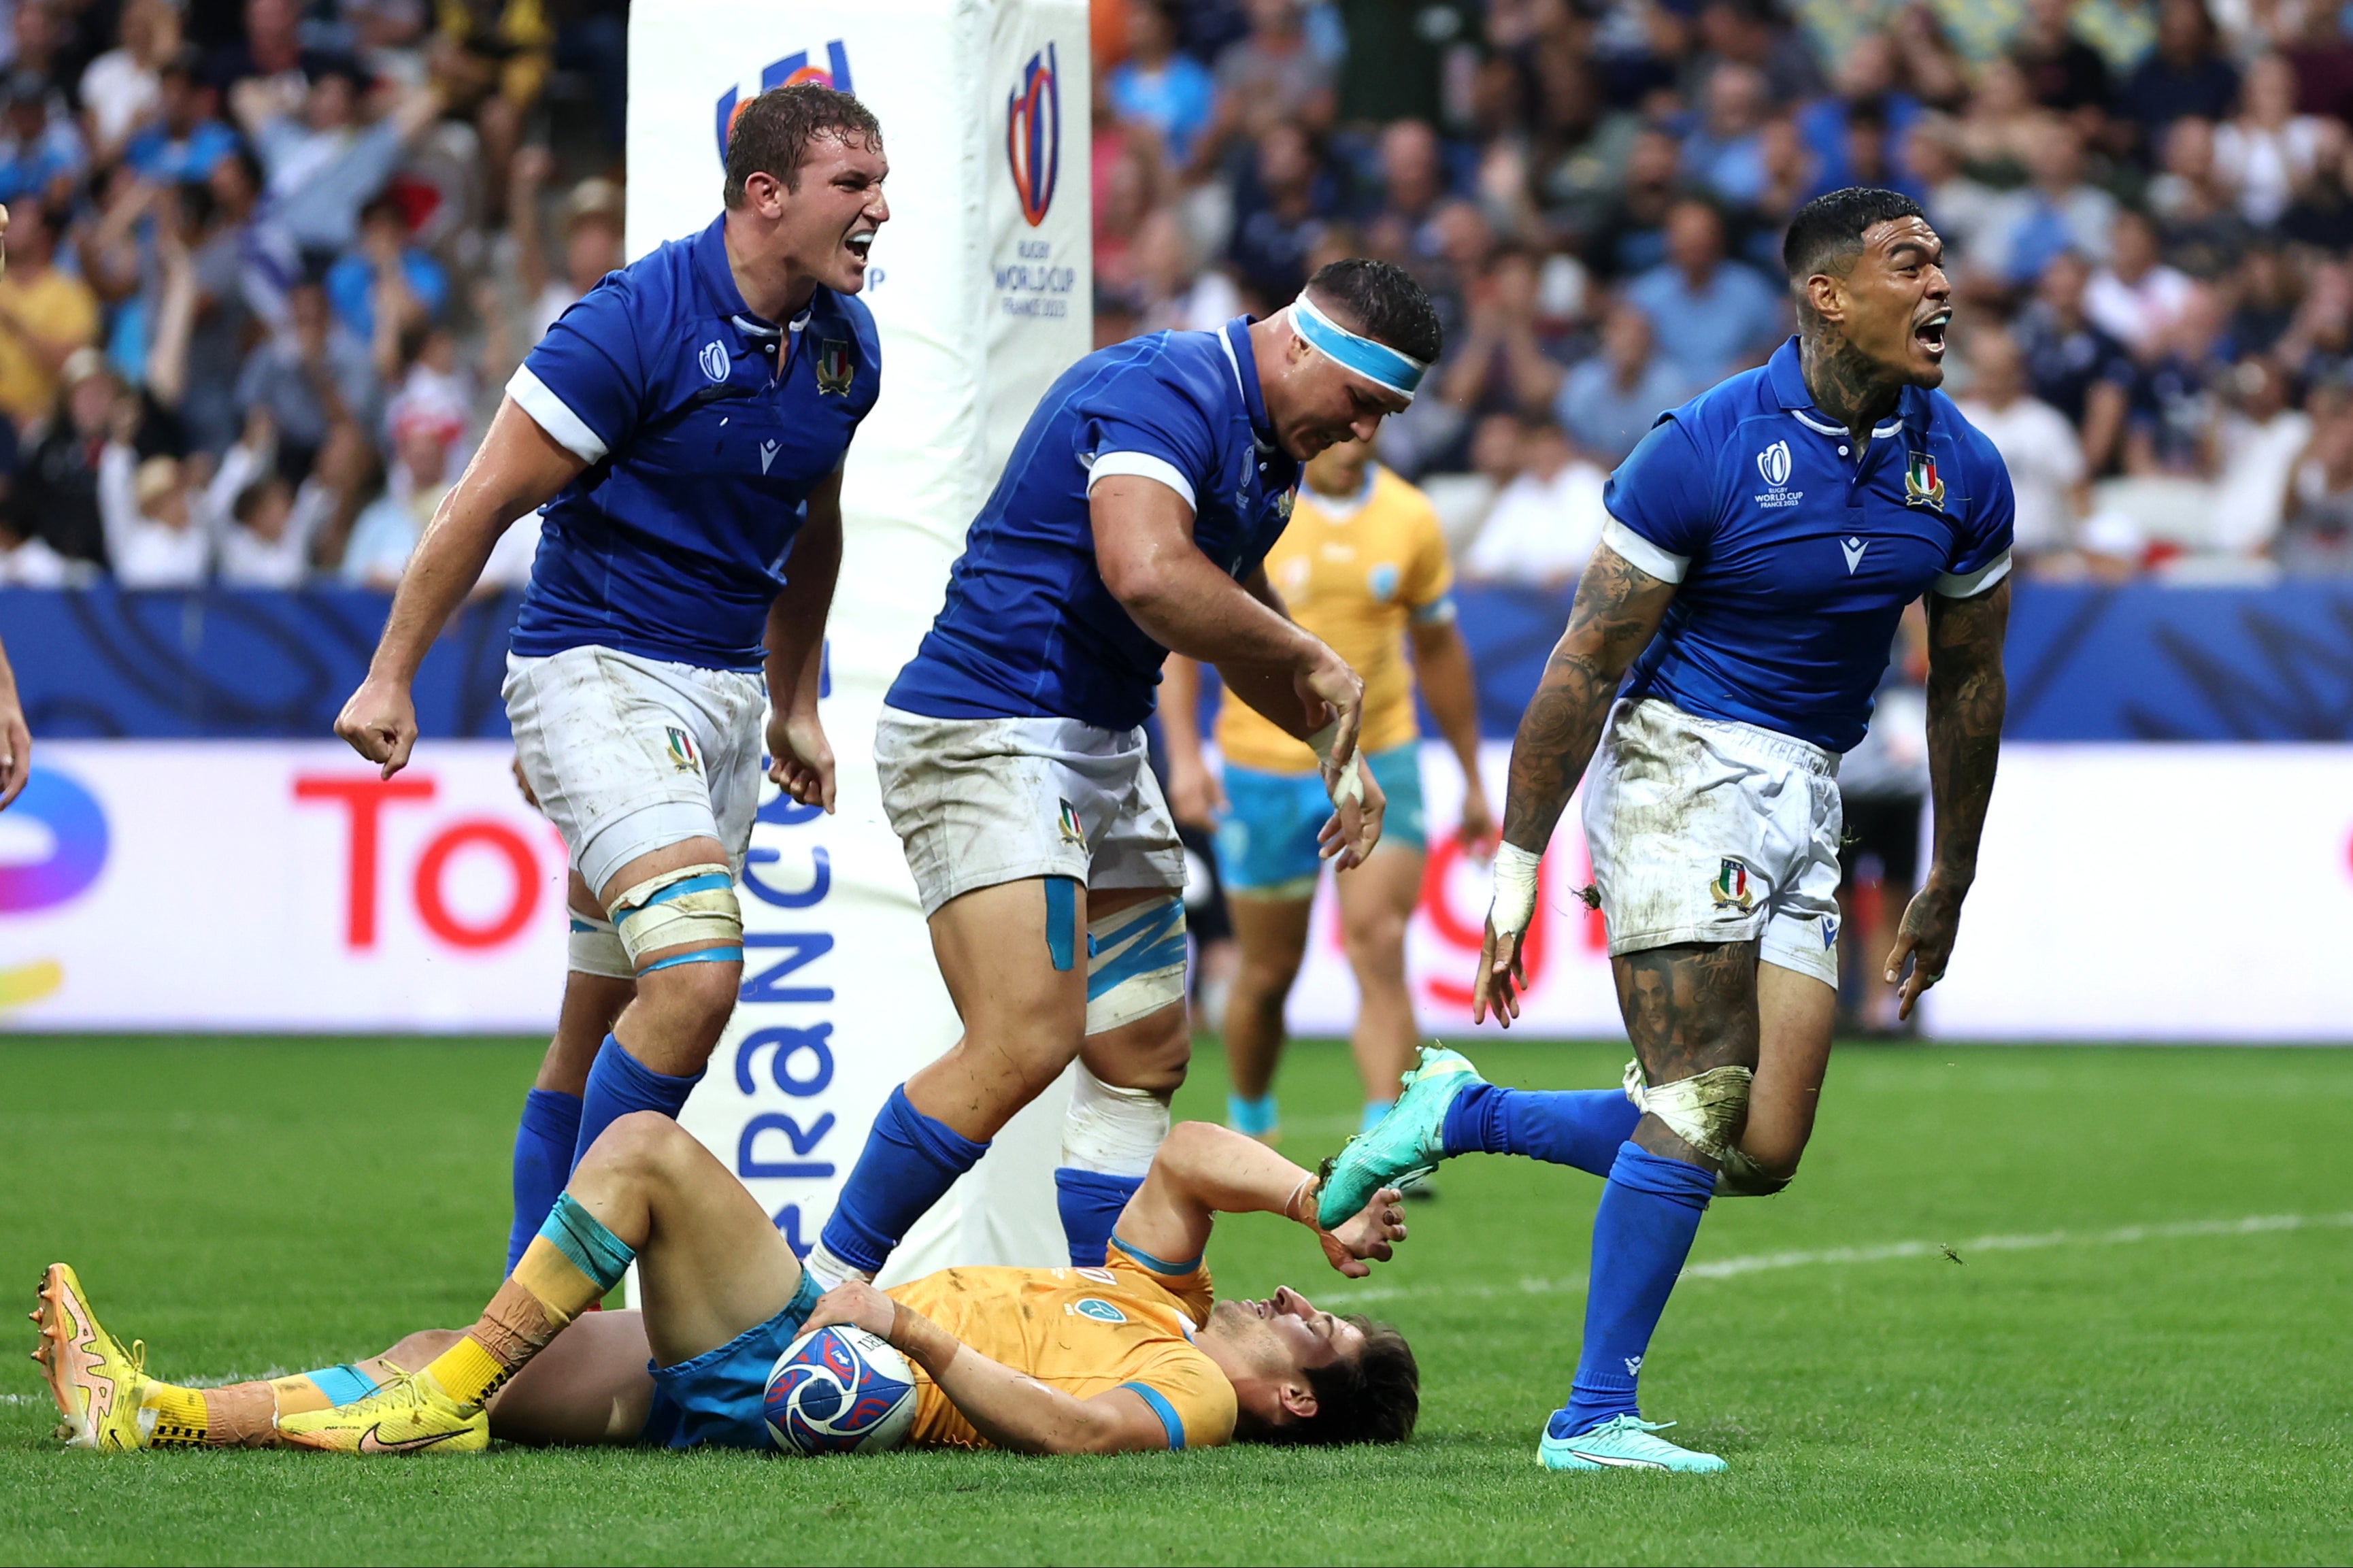 Italy scored 31 unanswered points in the second half as Uruguay faded